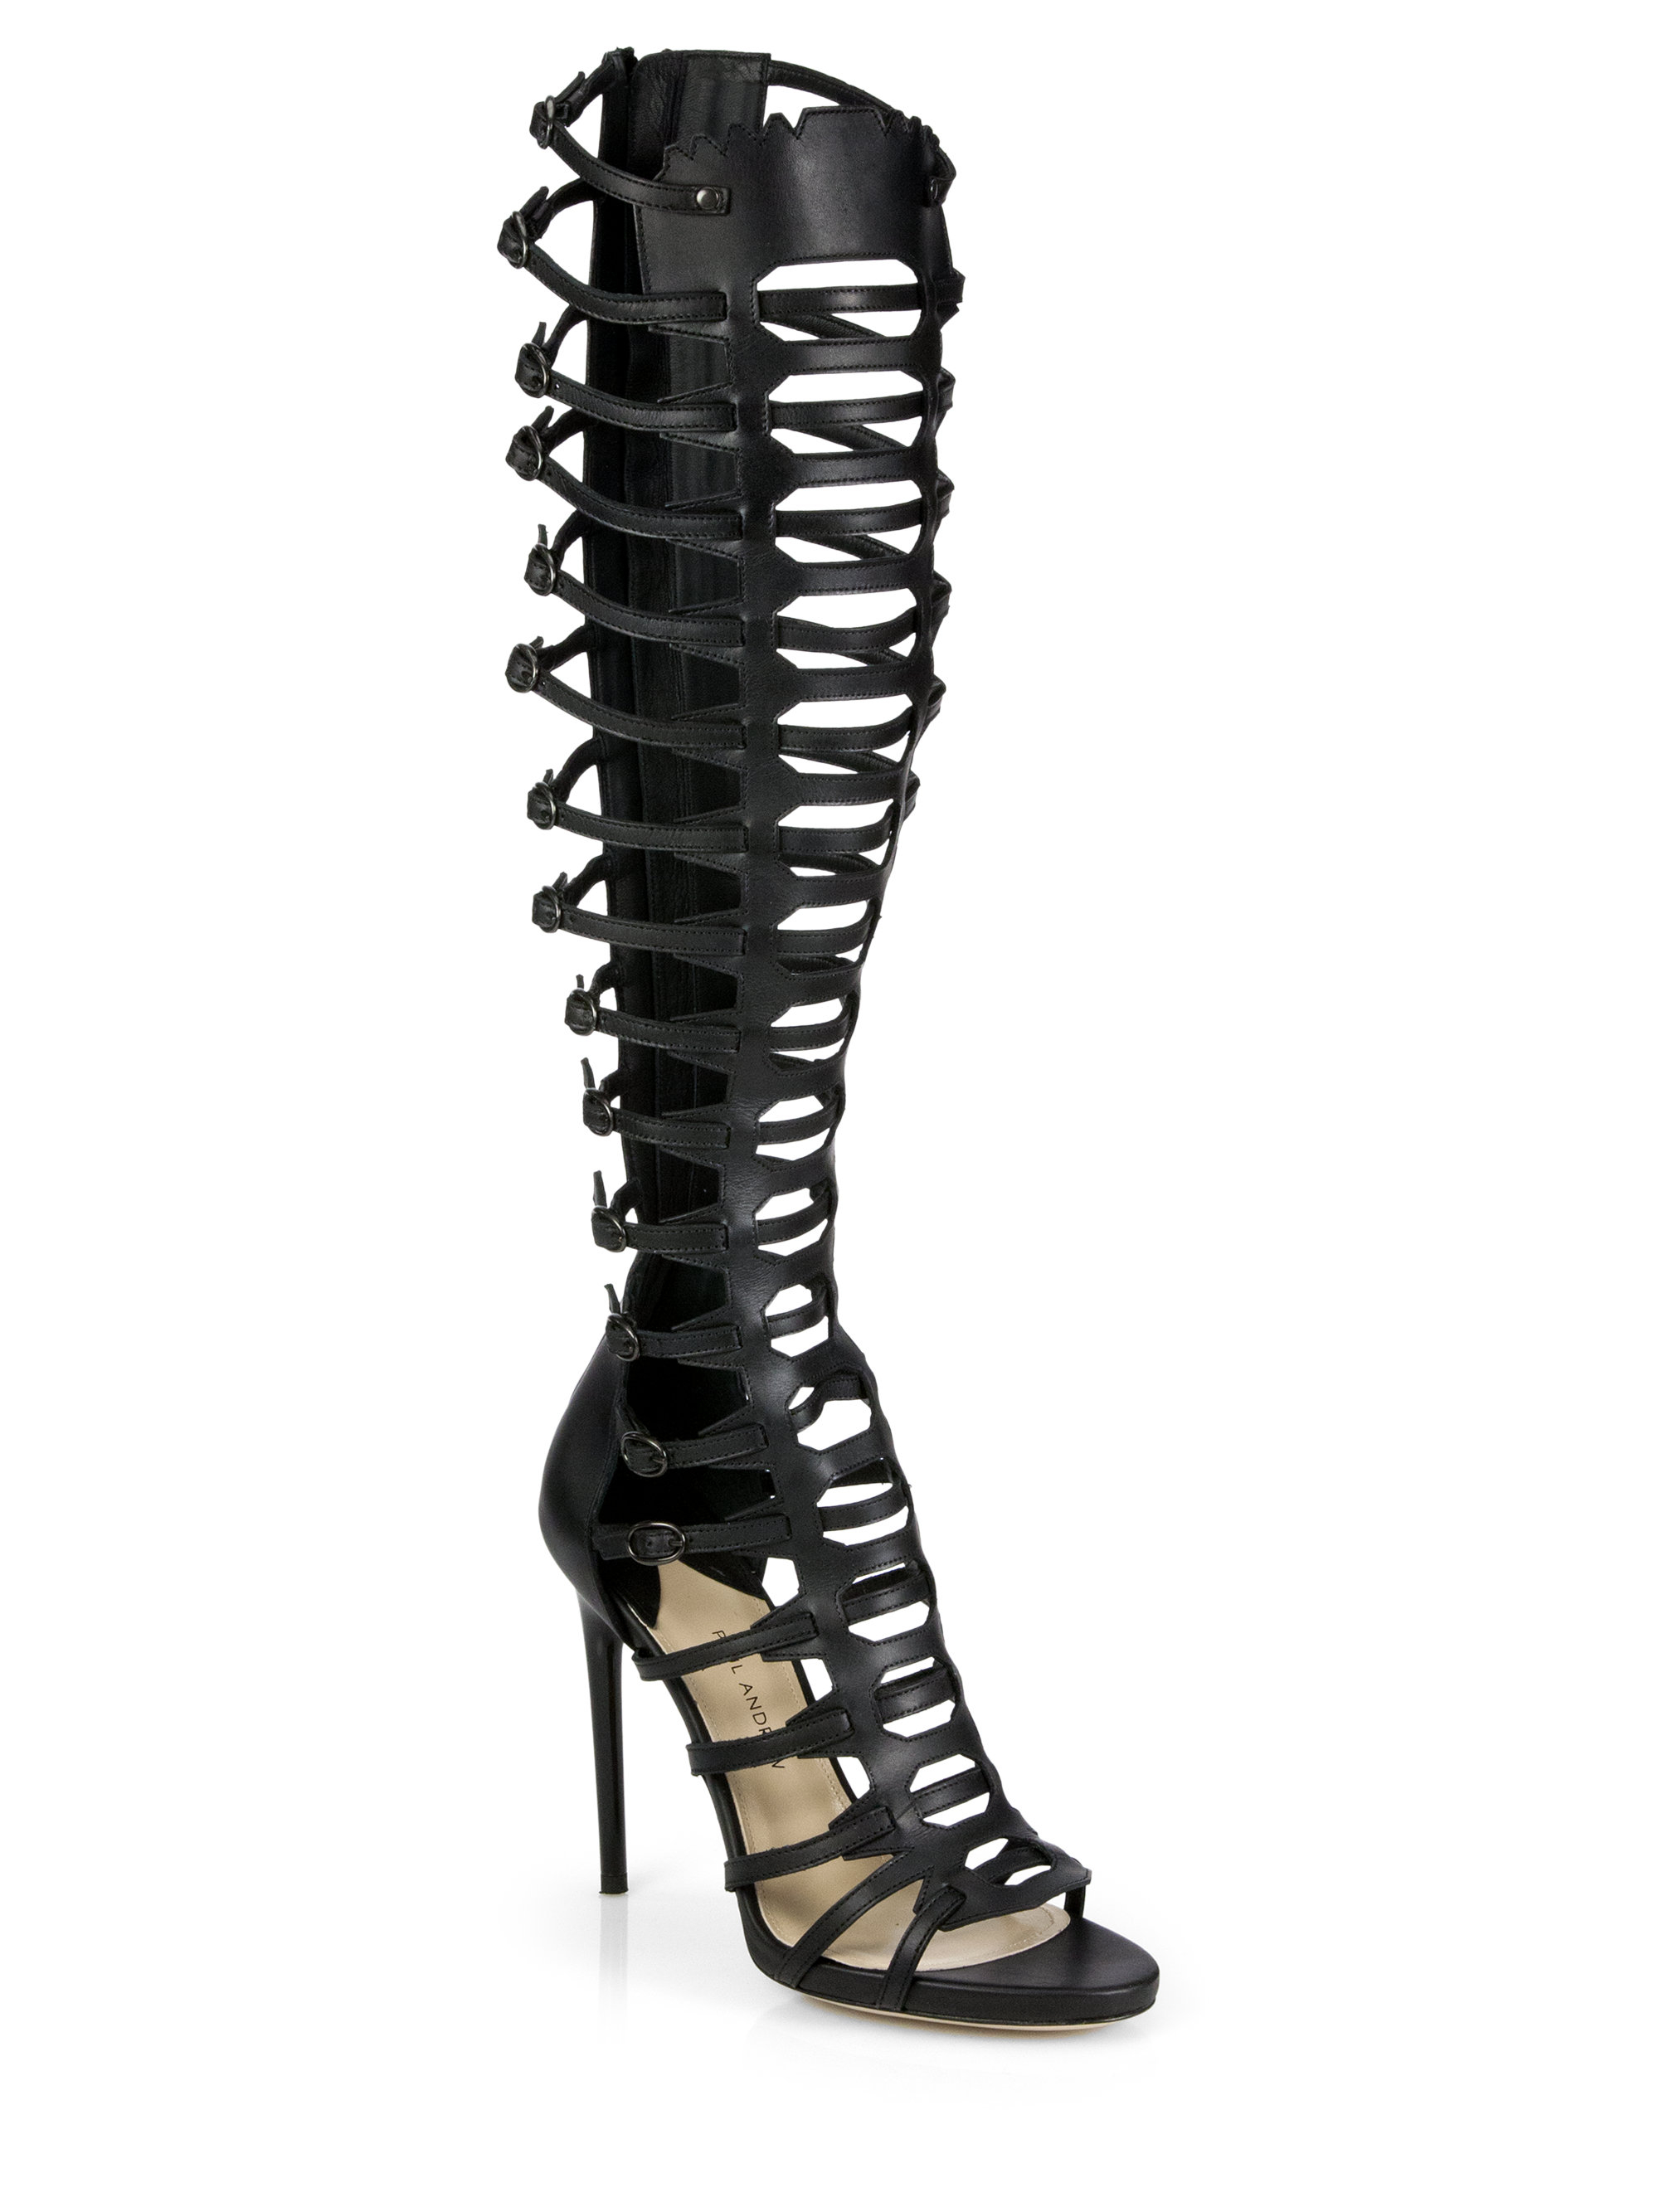 Lyst - Paul Andrew Athena Knee-High Gladiator Sandals in Black